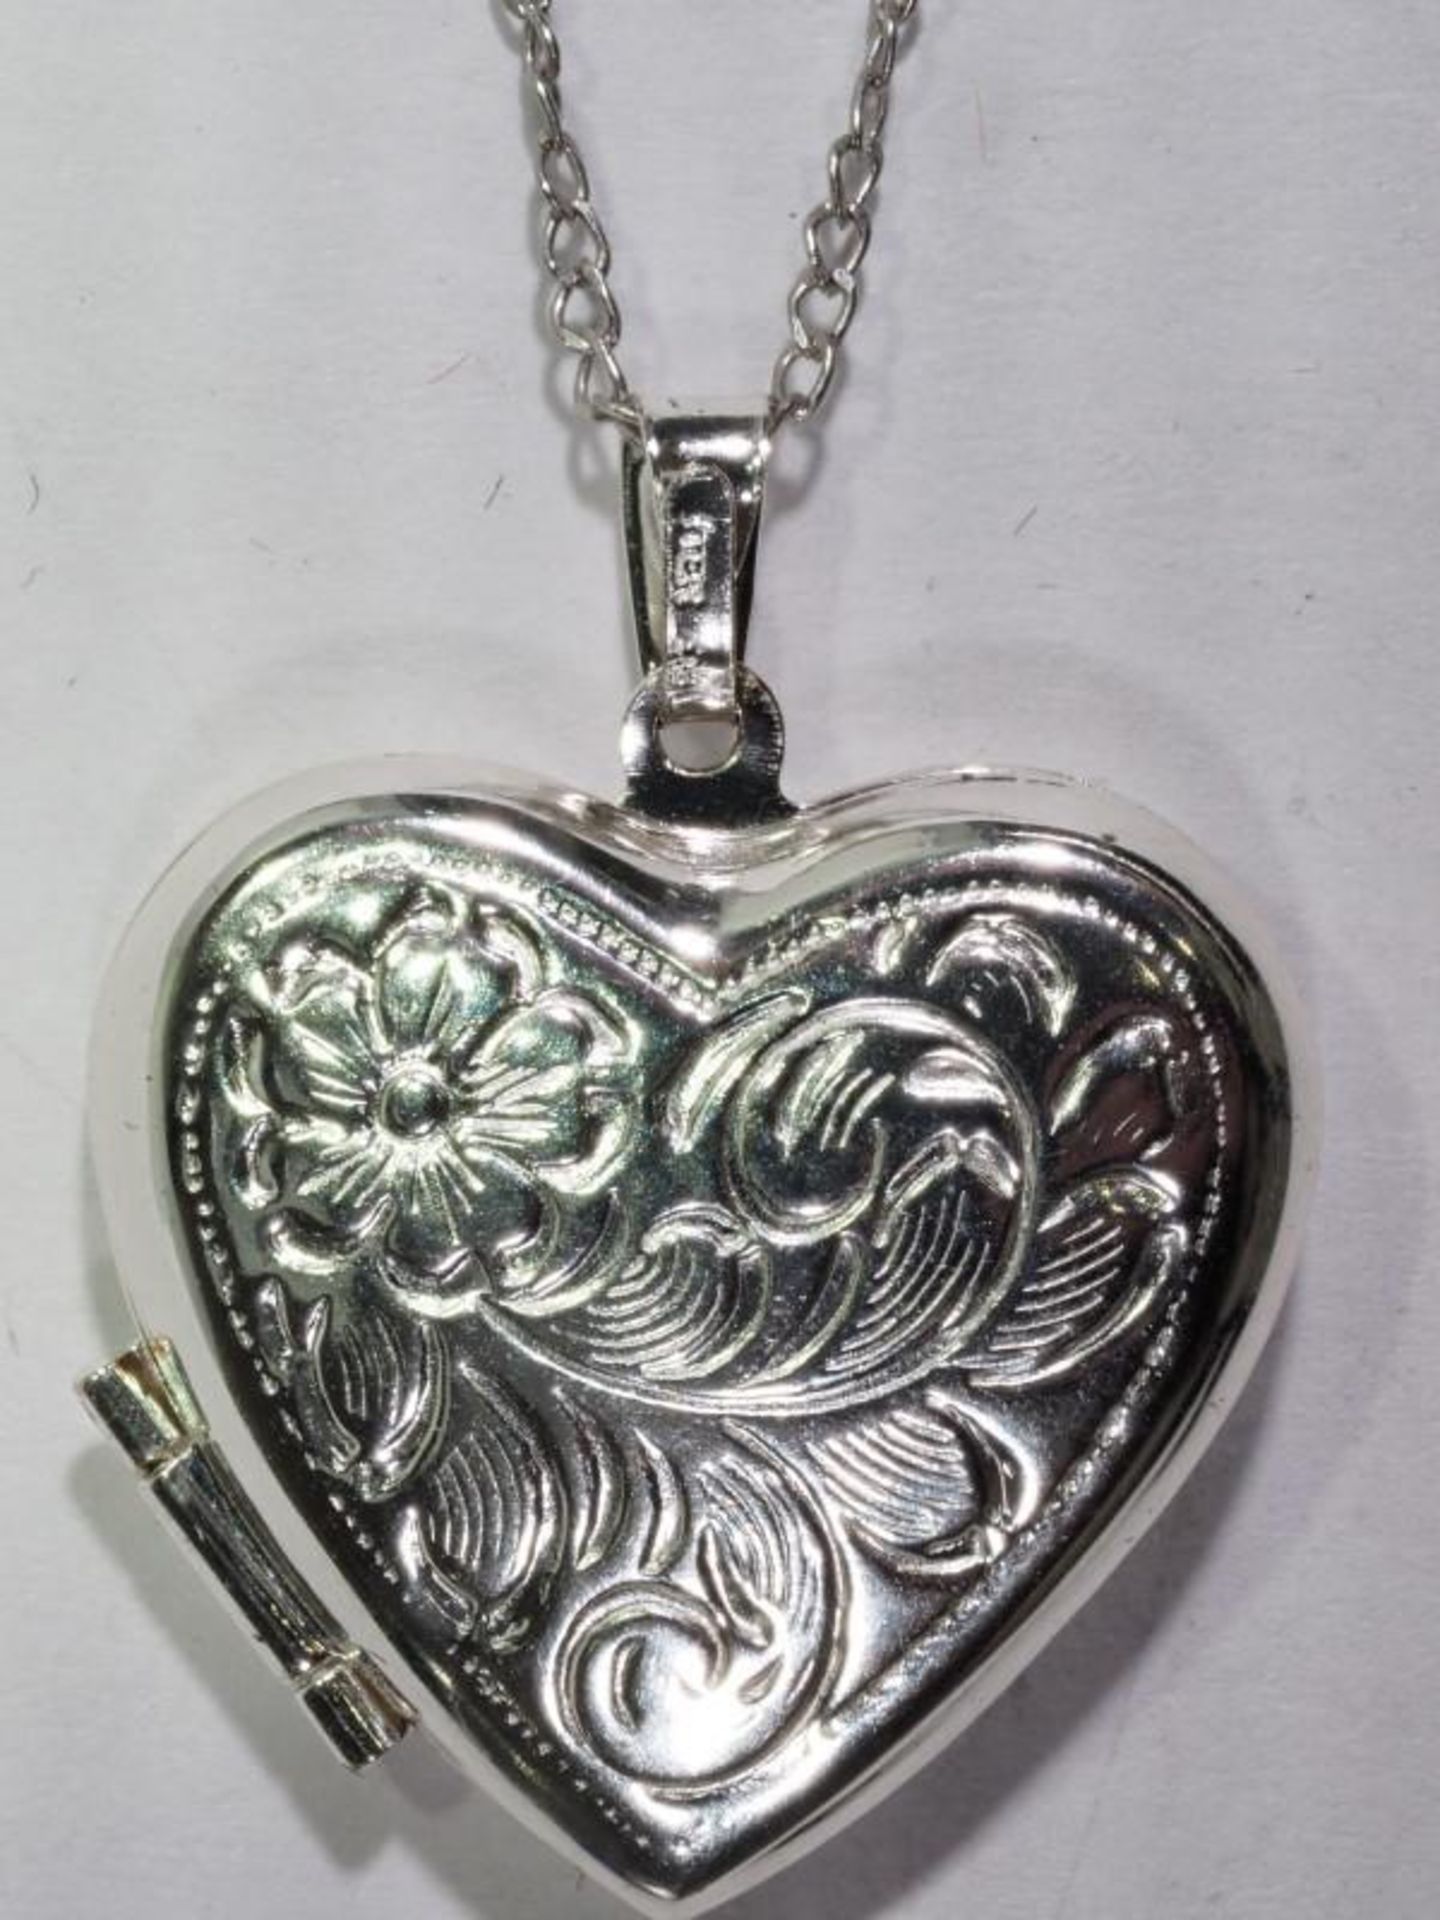 Sterling Silver Necklace With Heart Shaped Locket Pendant, Retail $125 (MS19 - 3) - Image 3 of 3